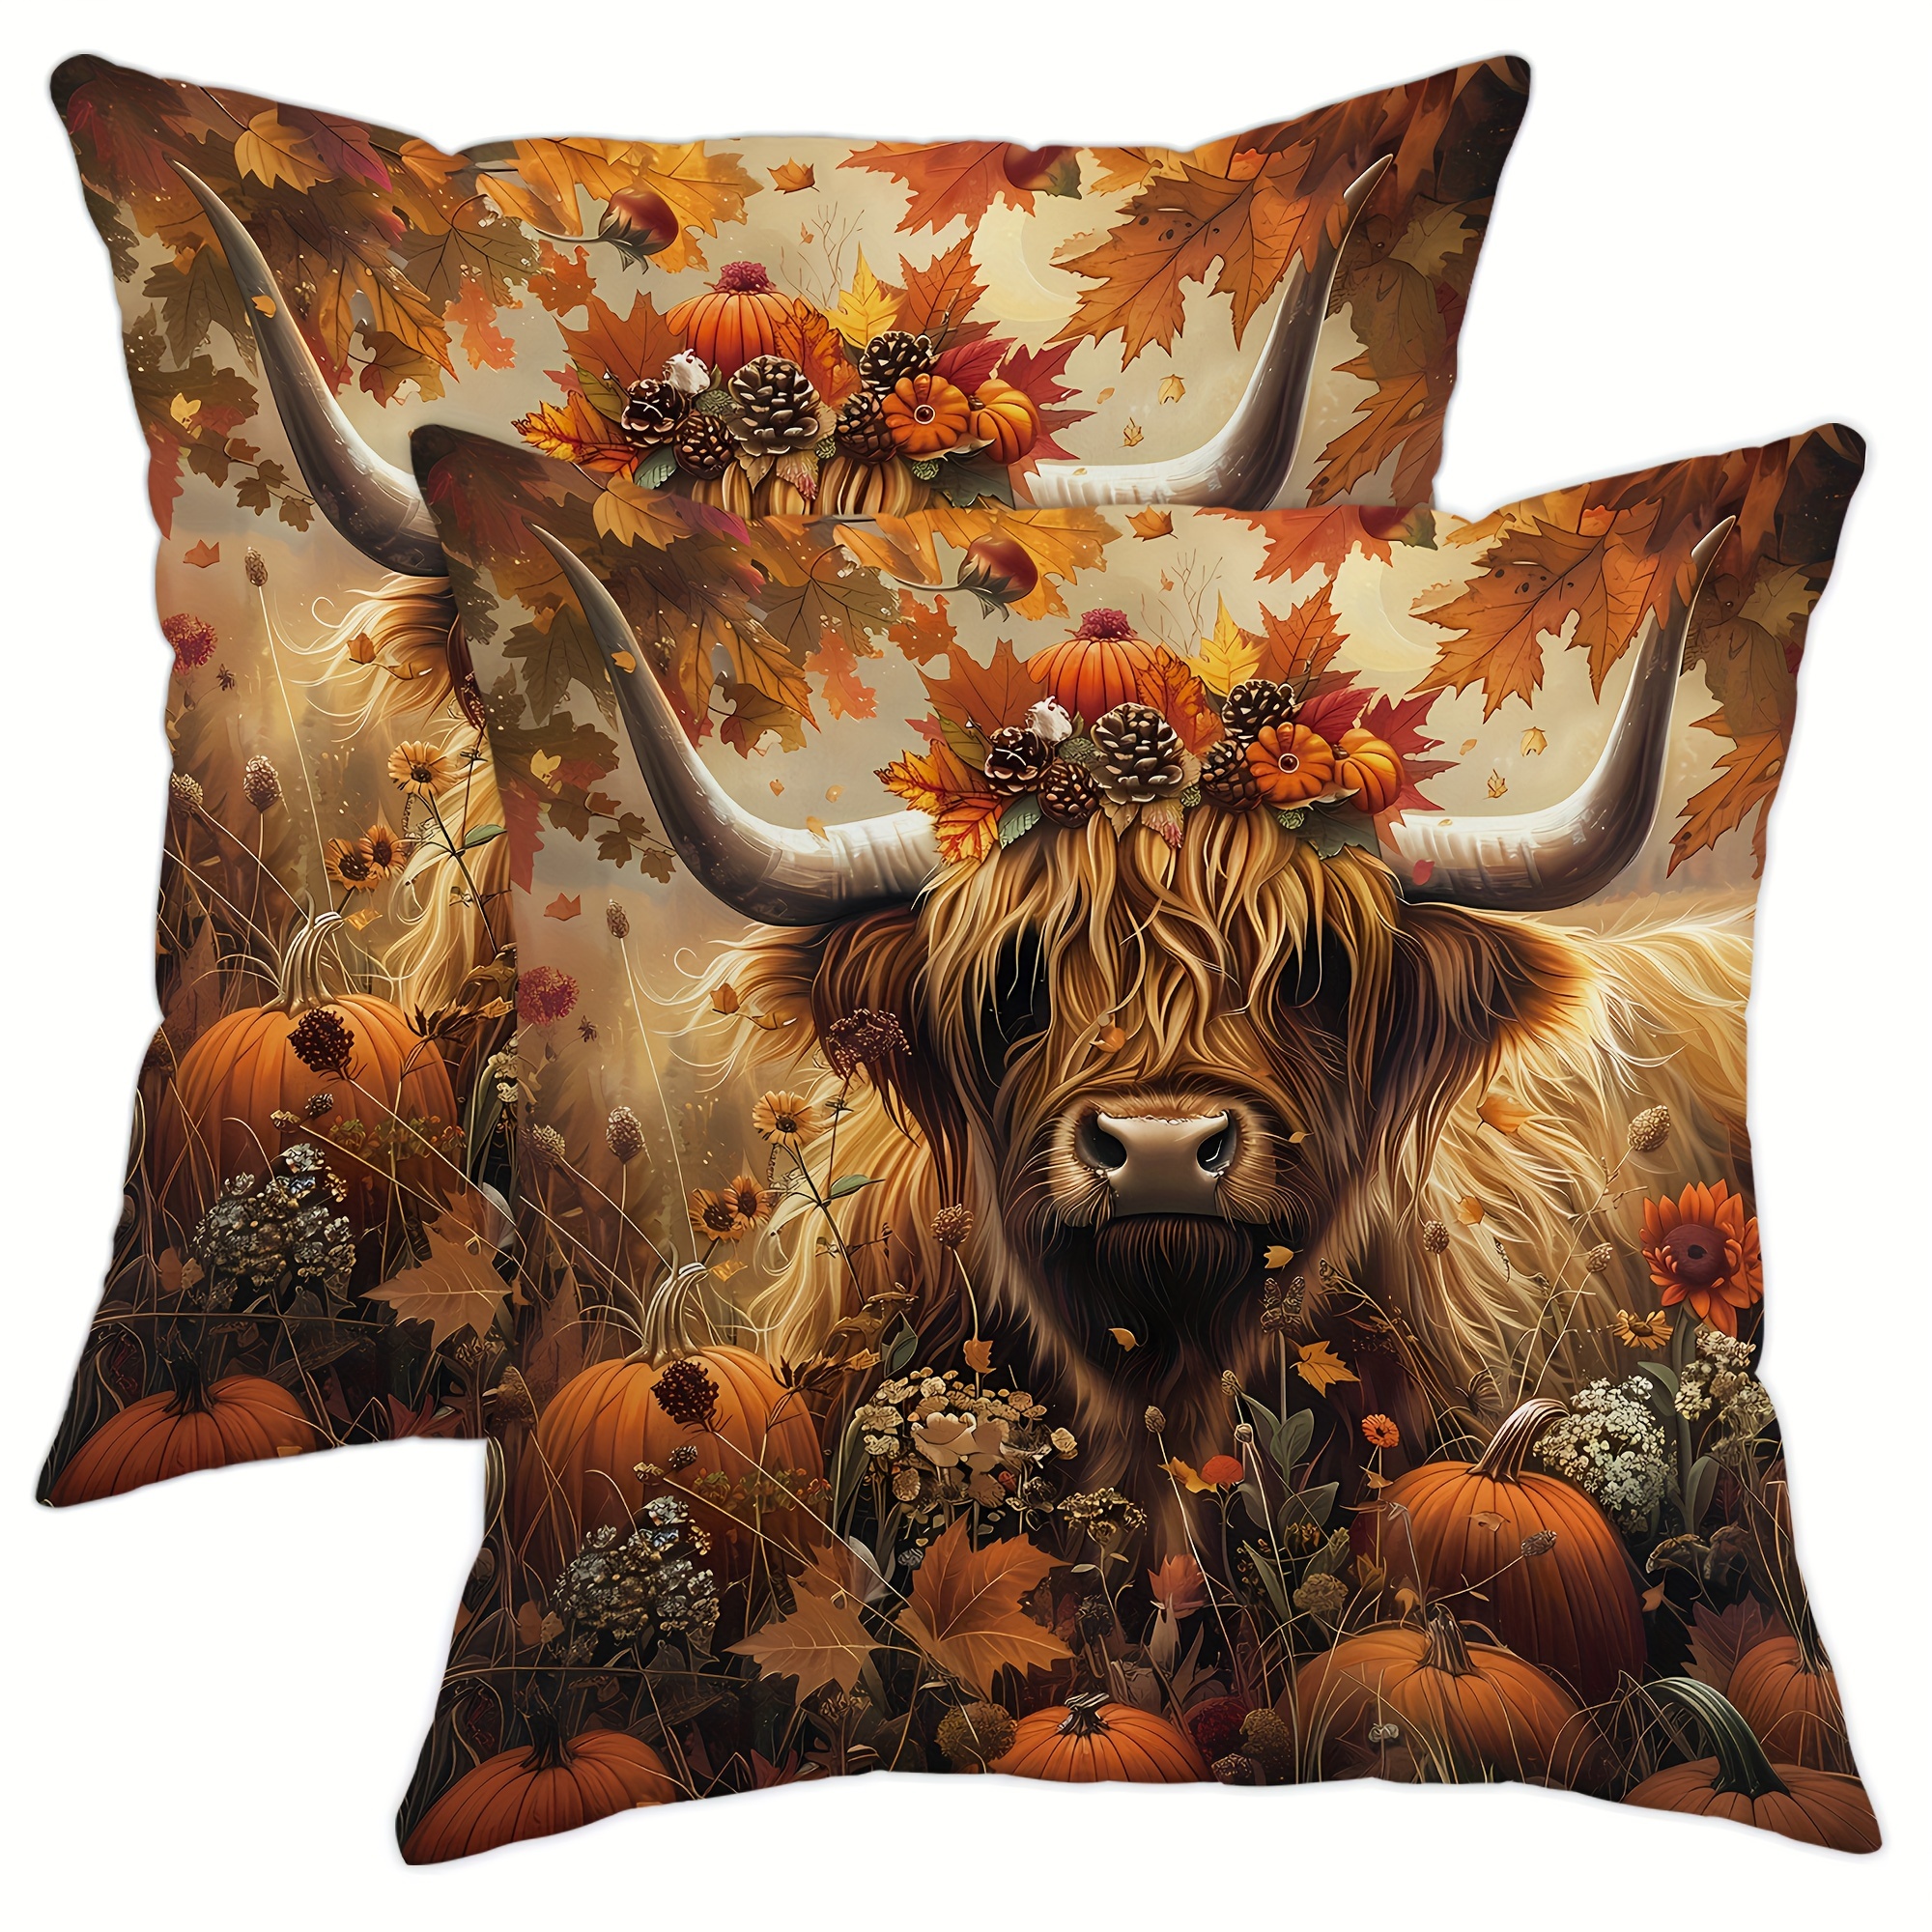 

2-piece Velvet Fall Thanksgiving Throw Pillow Covers - Highland Cow & Pumpkin Floral Design, Farmhouse Vintage Decor, 18x18 Inches, Zip Closure For Living Room & Bedroom Sofa